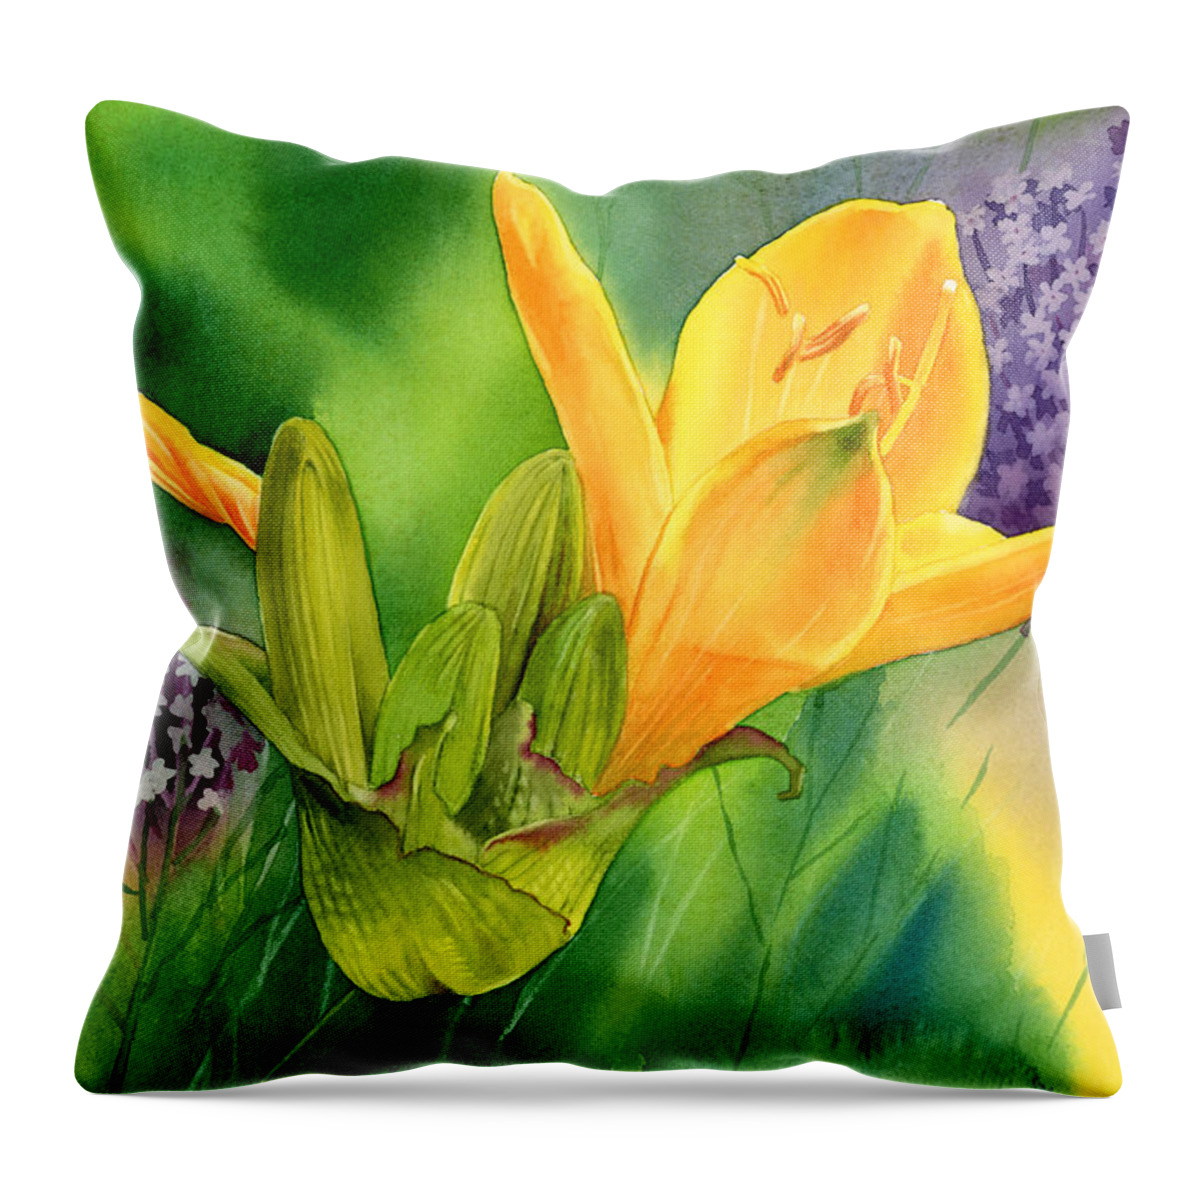 Lily Throw Pillow featuring the painting Spring Melody by Espero Art